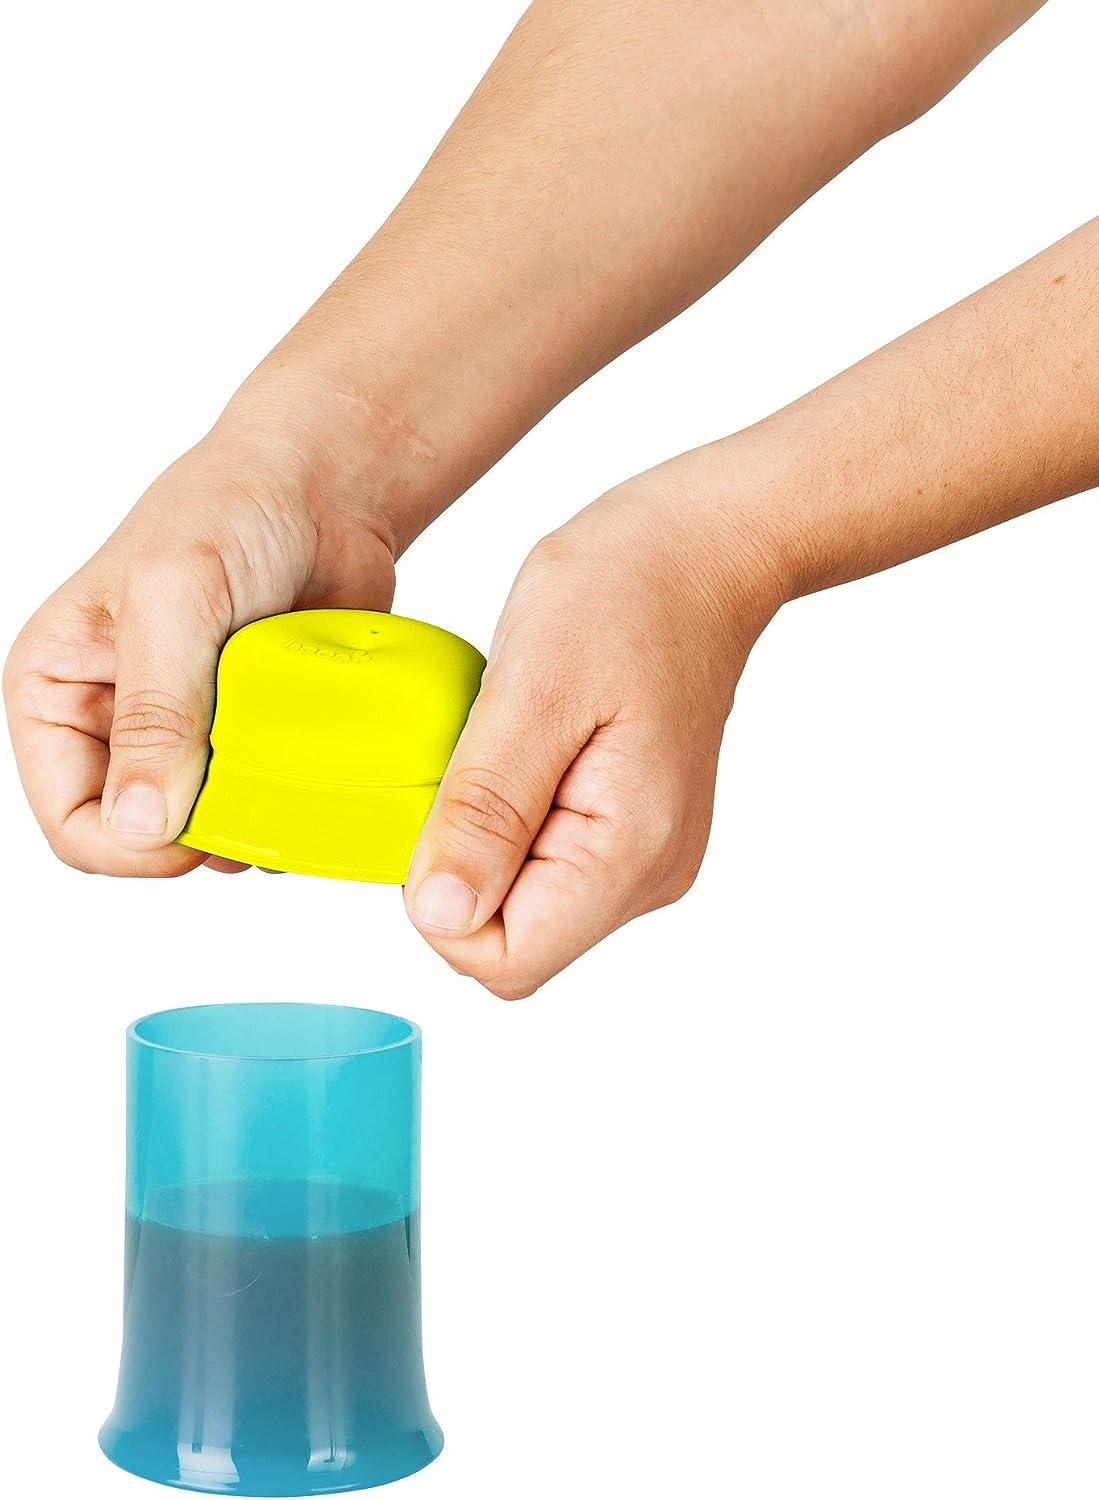  Boon Snug Silicone Sippy Cup Lids and Straws